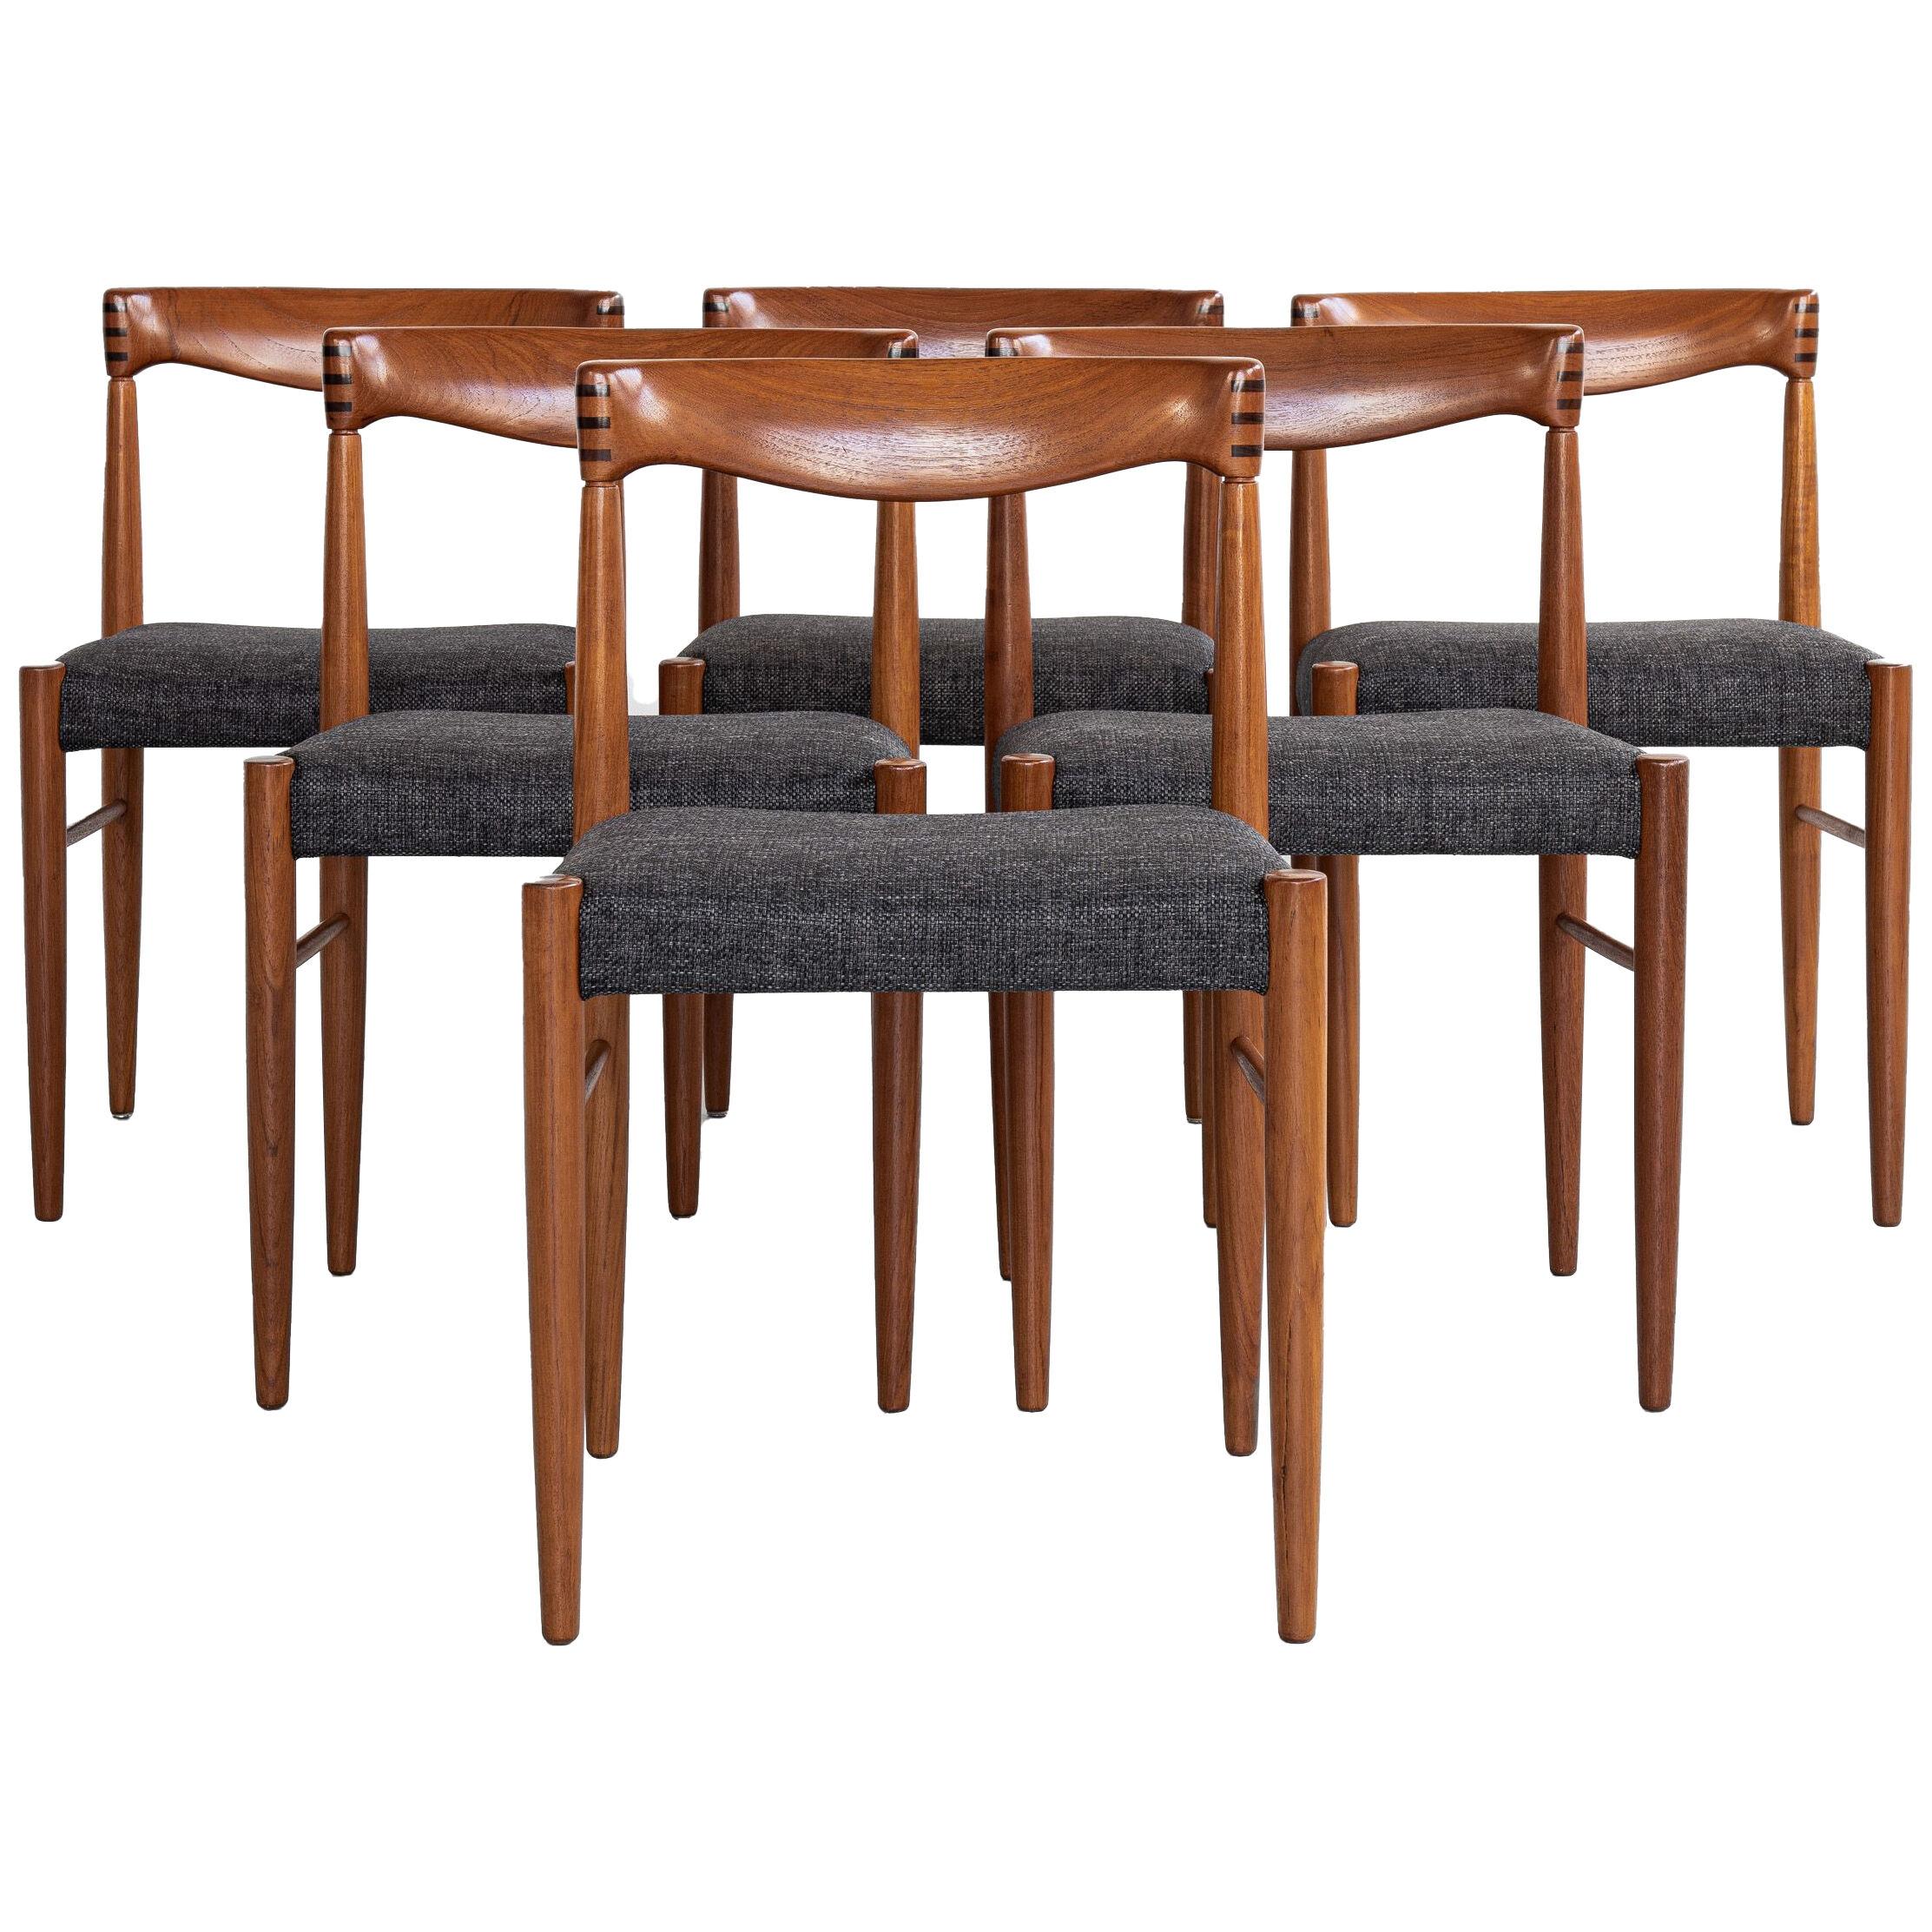 Midcentury Danish set of 6 dining chairs in teak by HW Klein for Bramin 1960s